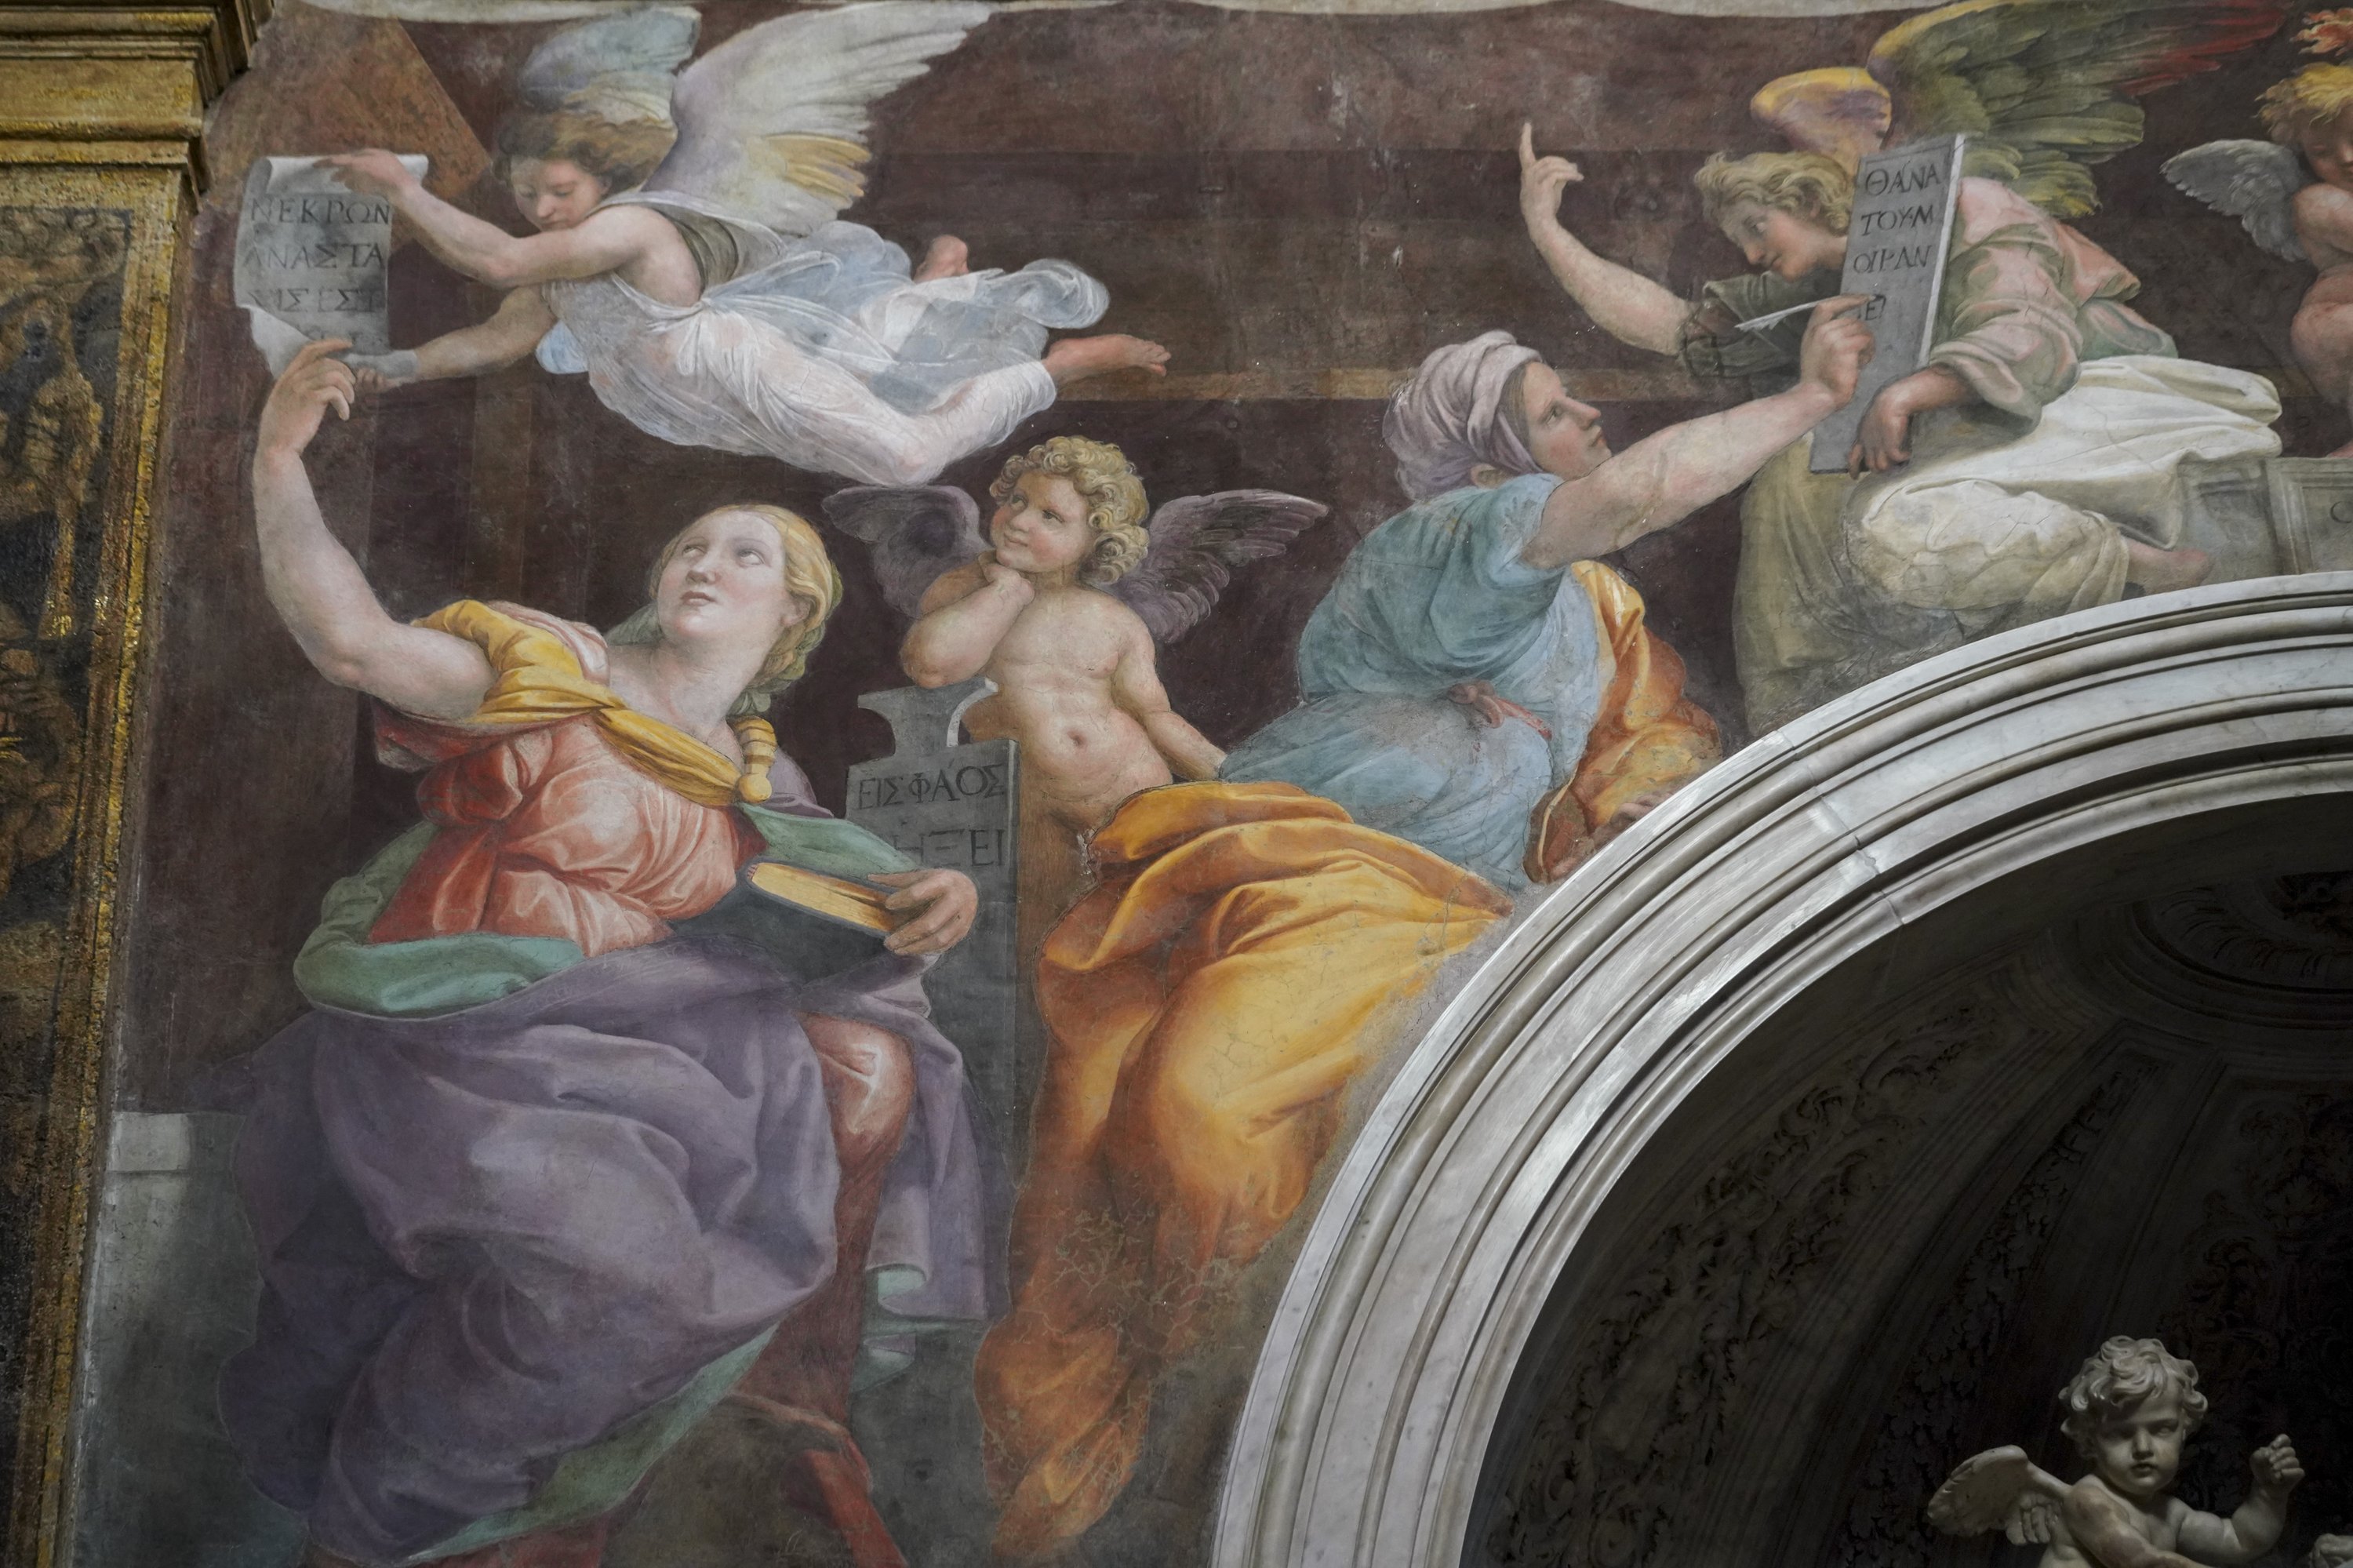 The churches of Rome wave with art and without ‘hordes’